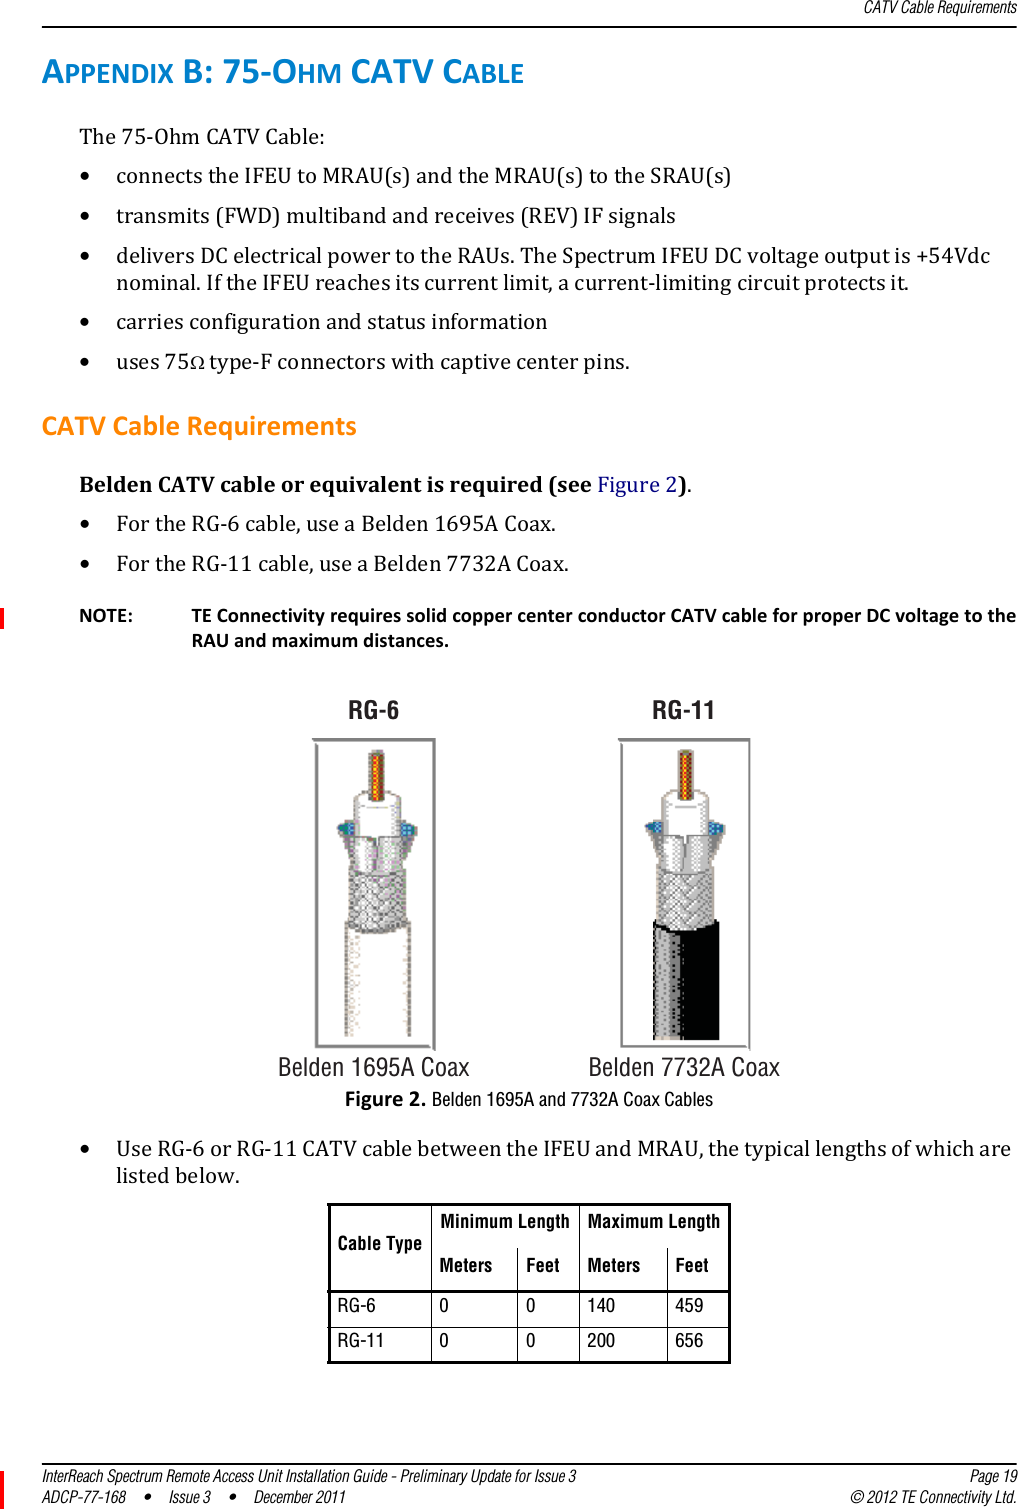 CATV Cable RequirementsInterReach Spectrum Remote Access Unit Installation Guide - Preliminary Update for Issue 3 Page 19ADCP-77-168  •  Issue 3  •  December 2011 © 2012 TE Connectivity Ltd.APPENDIXB:75‐OHMCATVCABLEThe75‐OhmCATVCable:•connectstheIFEUtoMRAU(s)andtheMRAU(s)totheSRAU(s)•transmits(FWD)multibandandreceives(REV)IFsignals•deliversDCelectricalpowertotheRAUs.TheSpectrumIFEUDCvoltageoutputis+54Vdcnominal.IftheIFEUreachesitscurrentlimit,acurrent‐limitingcircuitprotectsit.•carriesconfigurationandstatusinformation•uses75type‐Fconnectorswithcaptivecenterpins.CATVCableRequirementsBeldenCATVcableorequivalentisrequired(seeFigure2).•FortheRG‐6cable,useaBelden1695ACoax.•FortheRG‐11cable,useaBelden7732ACoax.RG-11Belden 1695A CoaxRG-6Belden 7732A CoaxNOTE: TEConnectivityrequiressolidcoppercenterconductorCATVcableforproperDCvoltagetotheRAUandmaximumdistances.Figure2.Belden 1695A and 7732A Coax Cables•UseRG‐6orRG‐11CATVcablebetweentheIFEUandMRAU,thetypicallengthsofwhicharelistedbelow.Cable TypeMinimum Length Maximum LengthMeters Feet Meters FeetRG-6 0 0 140 459RG-11 0 0 200 656